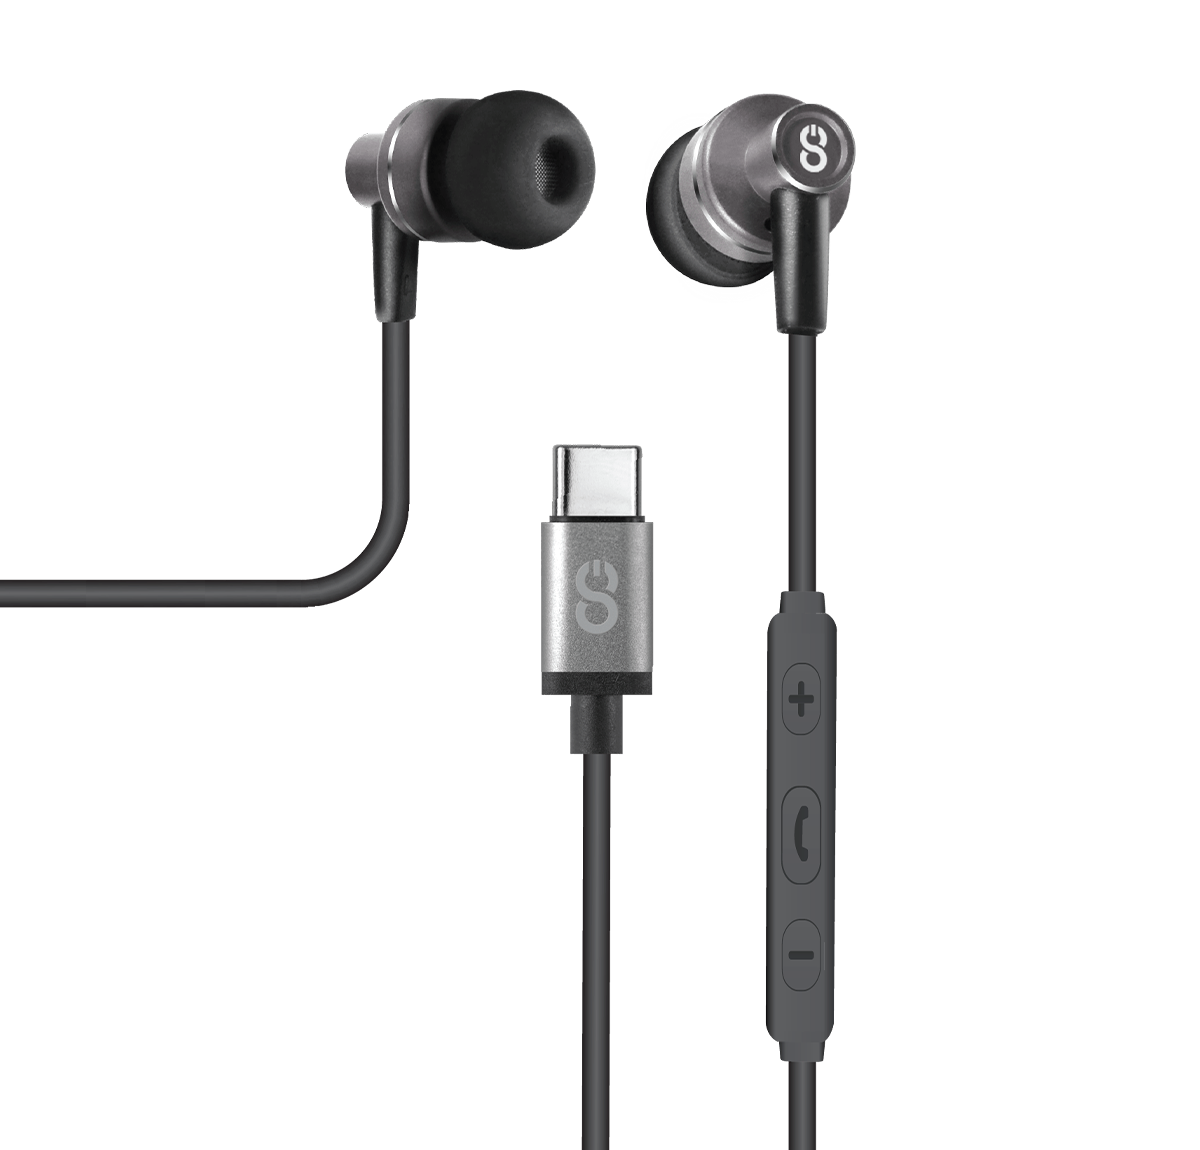 These are graphite grey in-ear wired earbuds. USB-C earphones for Type C devices, headphones with mic and a connector for USB-C earbuds